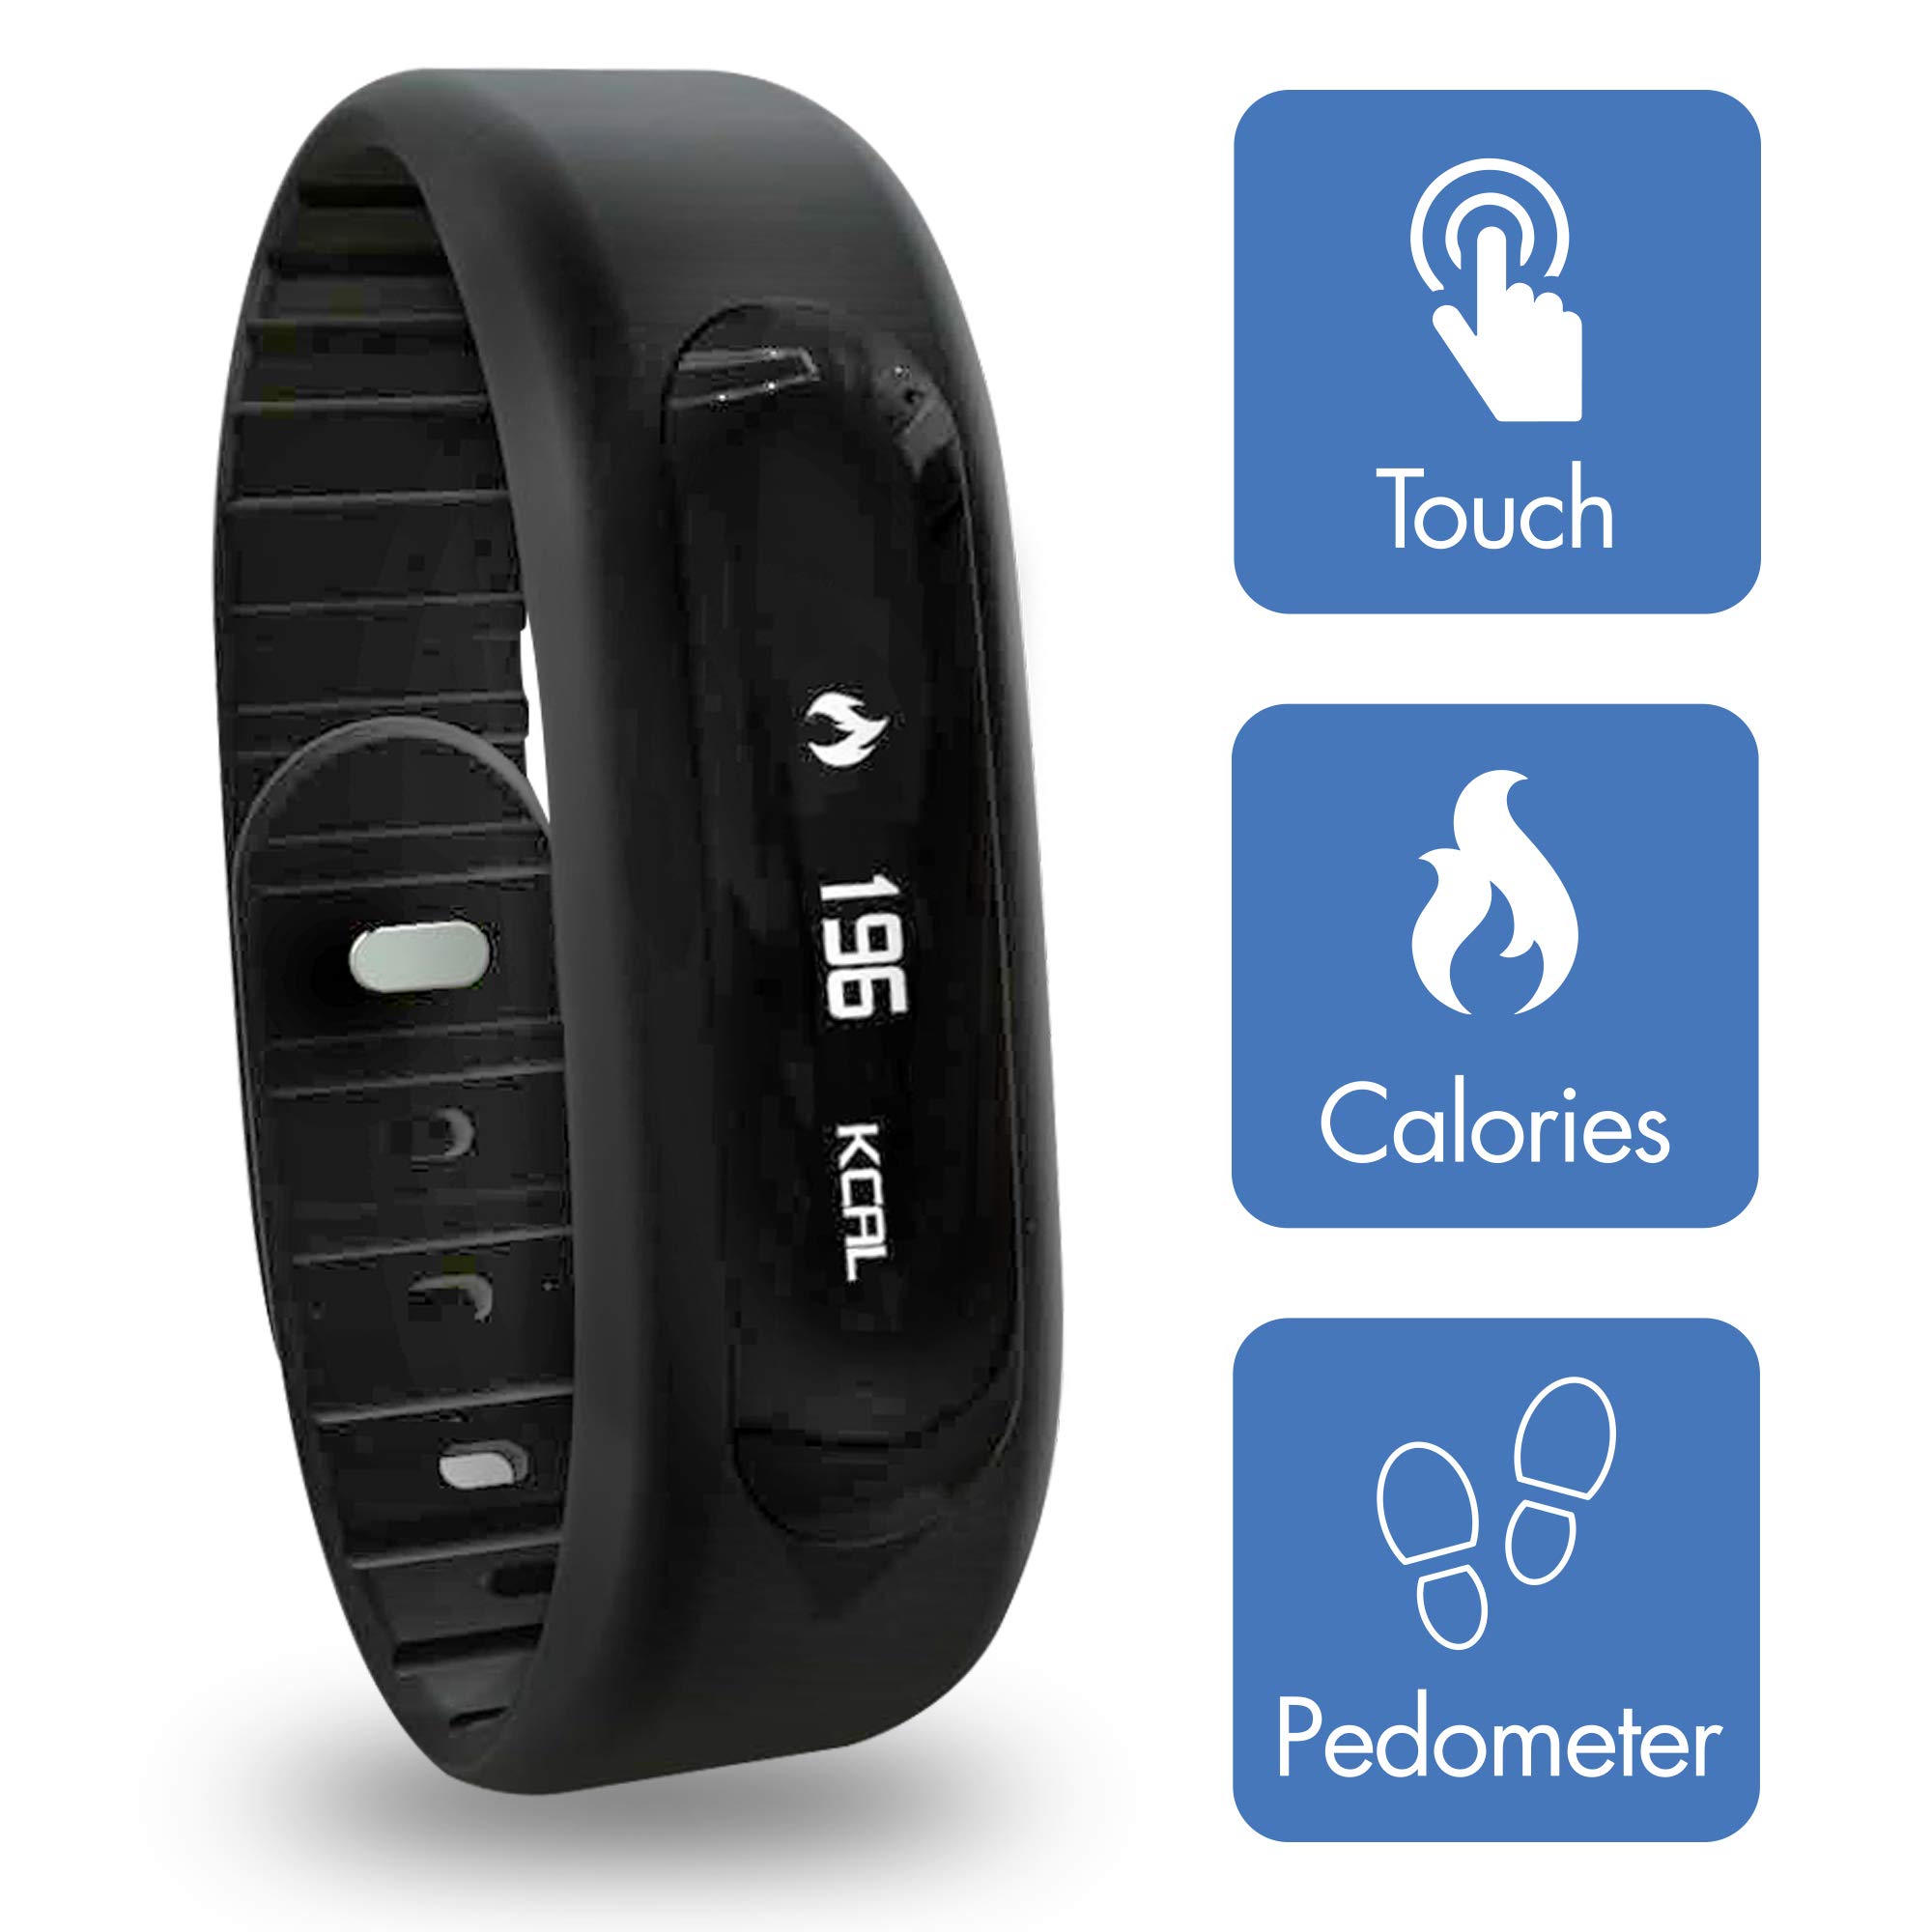 iN TECH - Bluetooth Smart Fitness Watch Bracelet Wristband Monitors Health, Pedometer, Calories Burned, Distance, Sleep, Touch Screen Display, Compatible Pairing with iOs and Android 2 Year Warranty